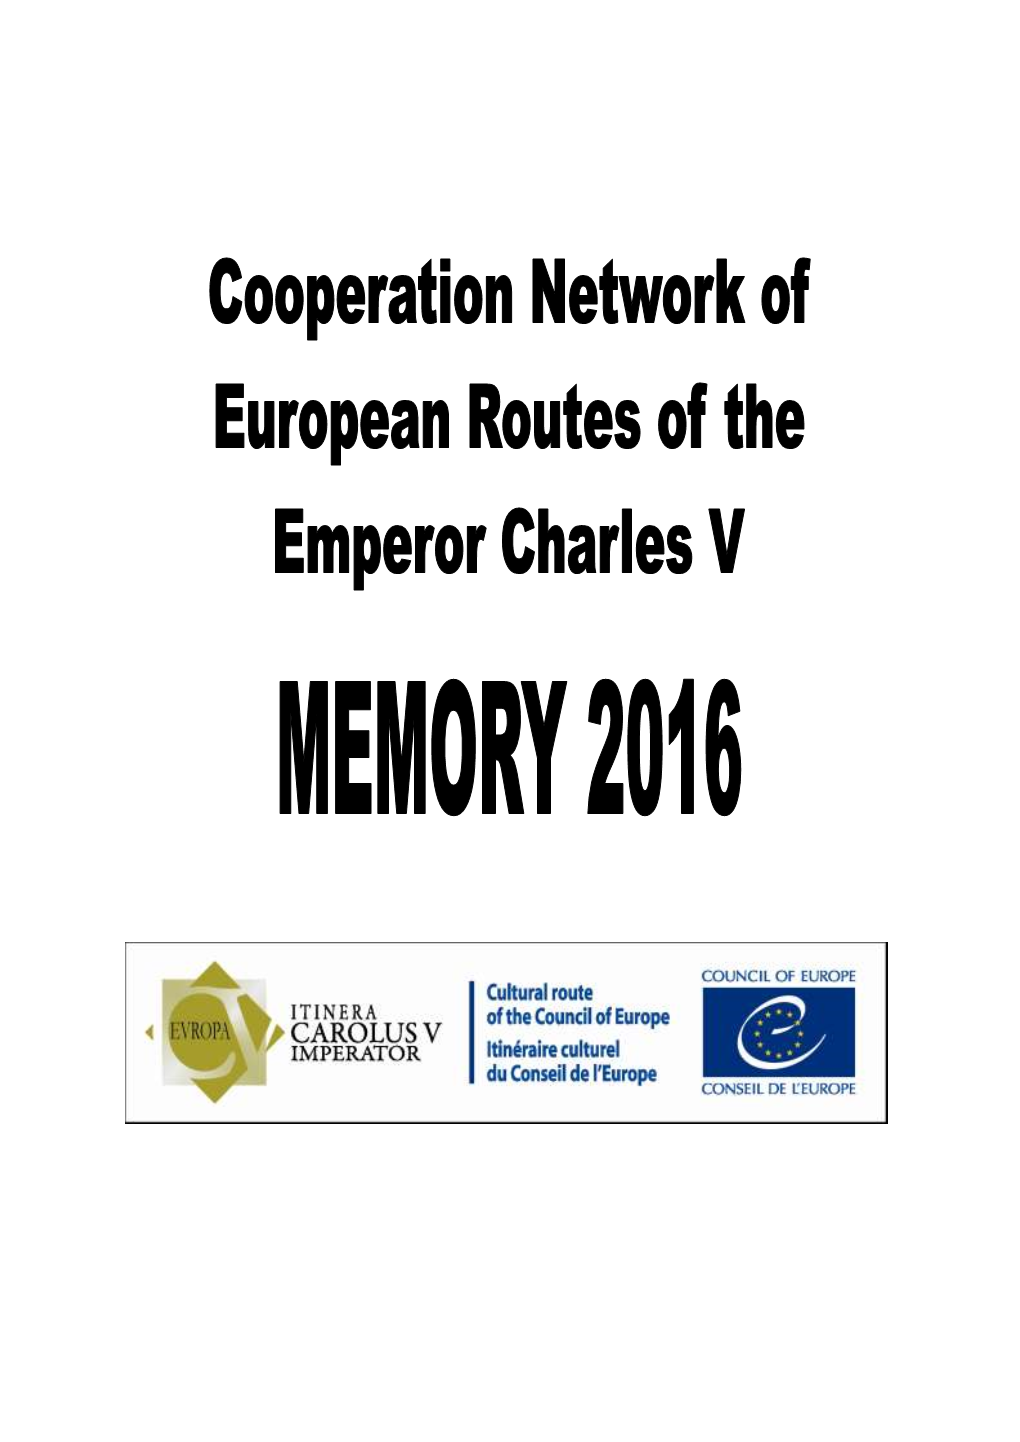 Cooperation Network of European Routes of Emperor Charles V